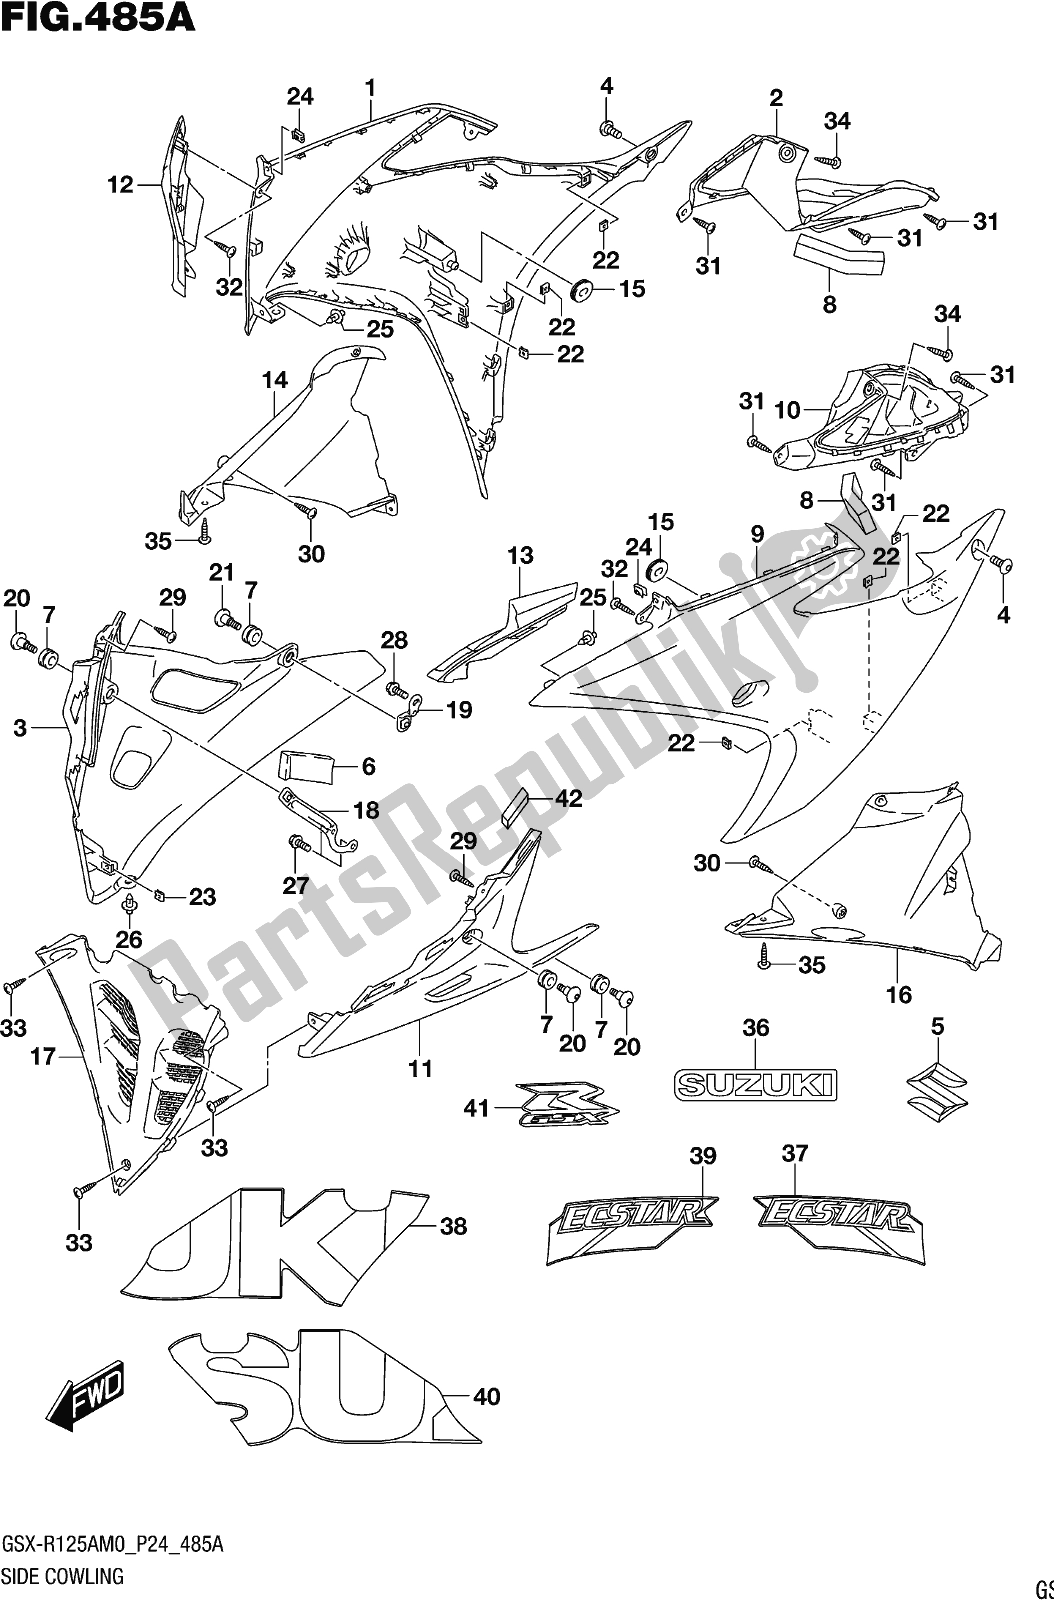 All parts for the Fig. 485a Side Cowling of the Suzuki Gsx-r 125A 2020